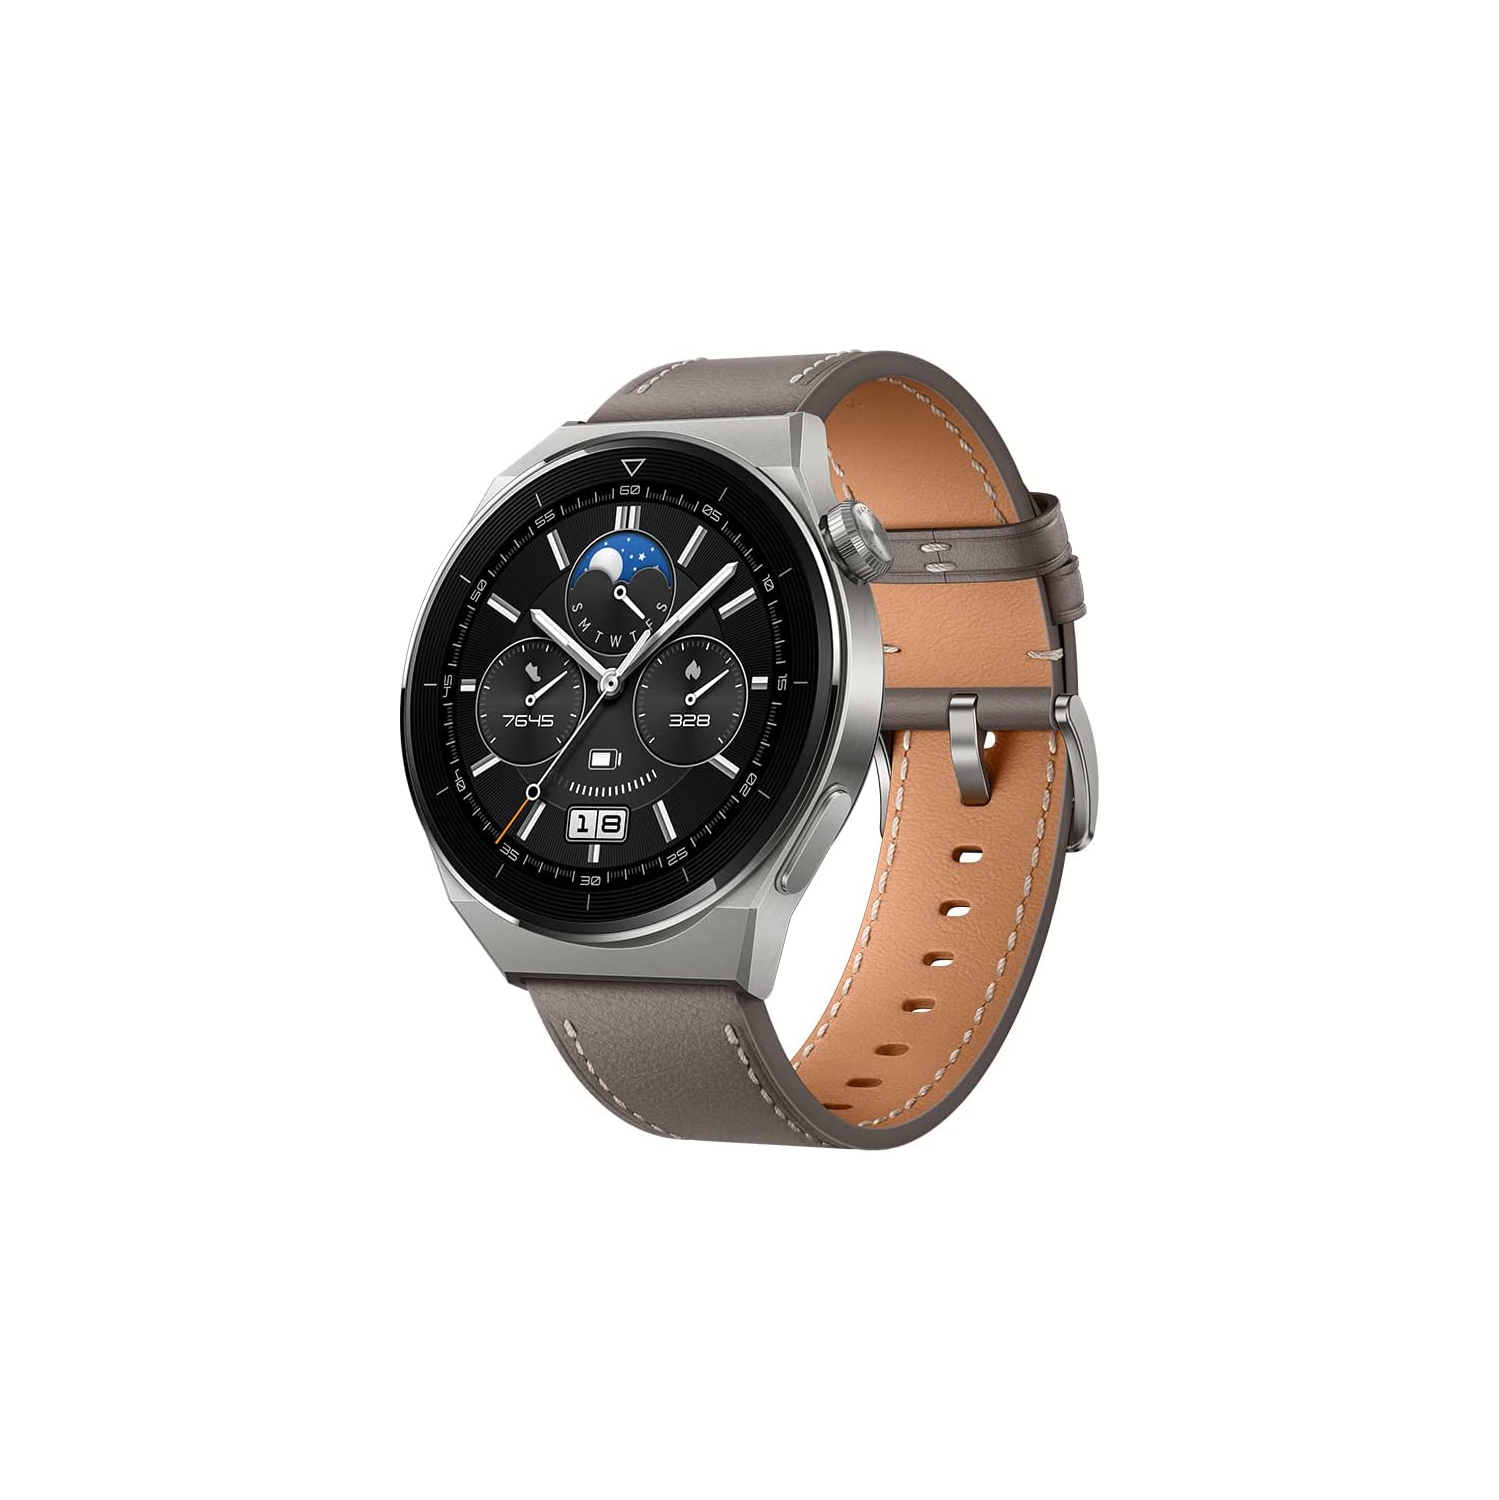 HUAWEI WATCH GT 3 Pro - All-Day Fitness Tracker and Health Monitoring - Durable Battery - Sapphire Watch Dial - Bluetooth Calling - 46mm, Gray Leather Strap